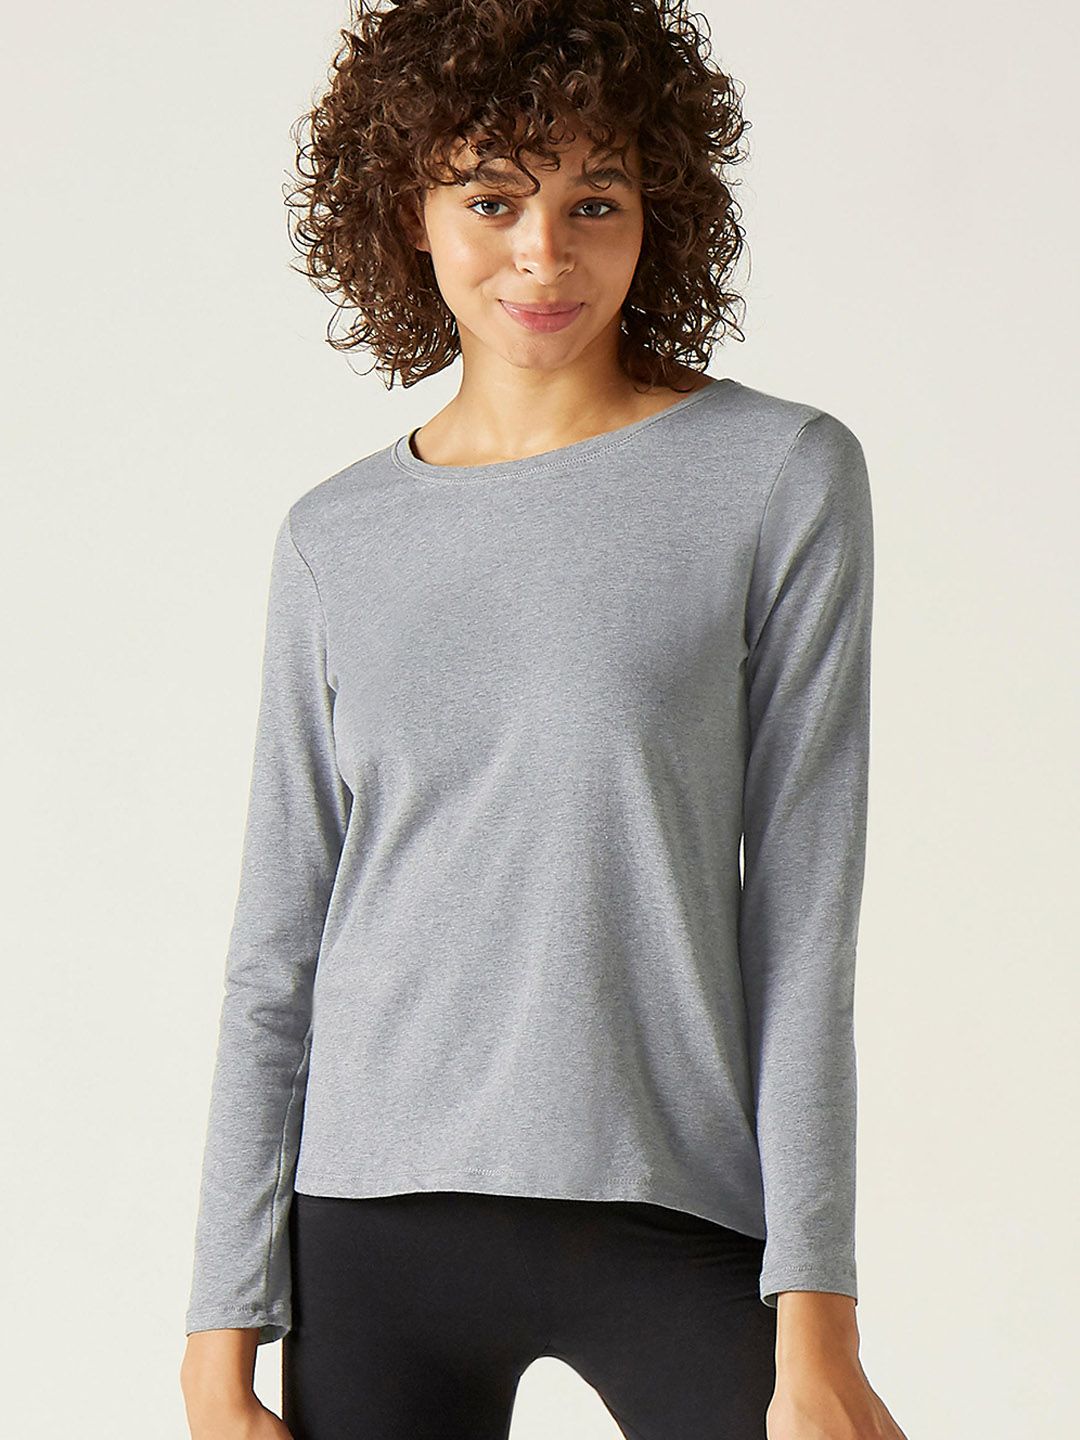 NYAMBA By Decathlon Women Grey Solid Round Neck T-shirt Price in India